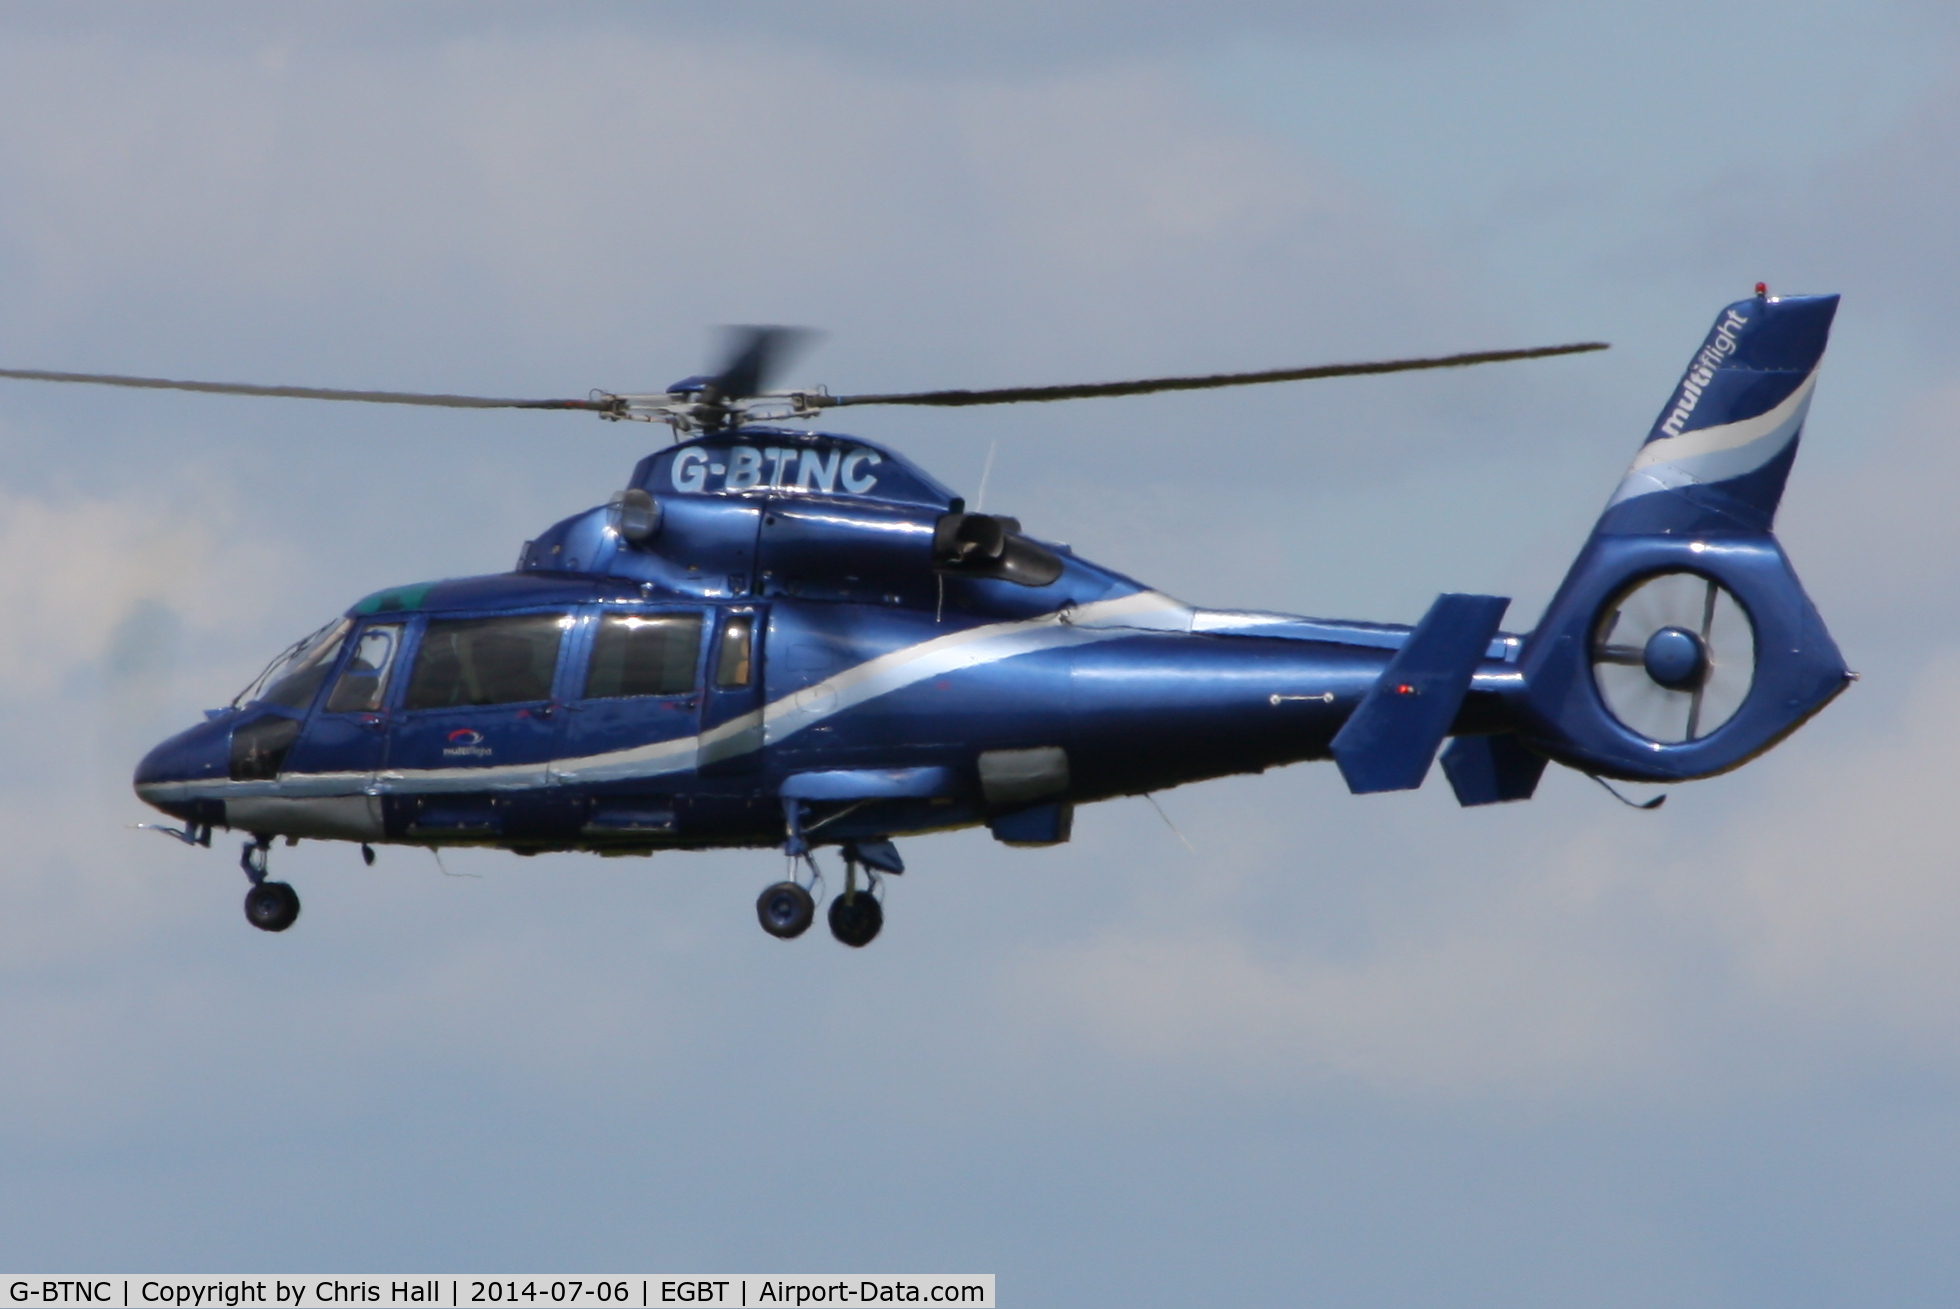 G-BTNC, 1991 Aerospatiale AS-365N-2 Dauphin C/N 6409, ferrying race fans to the British F1 Grand Prix at Silverstone